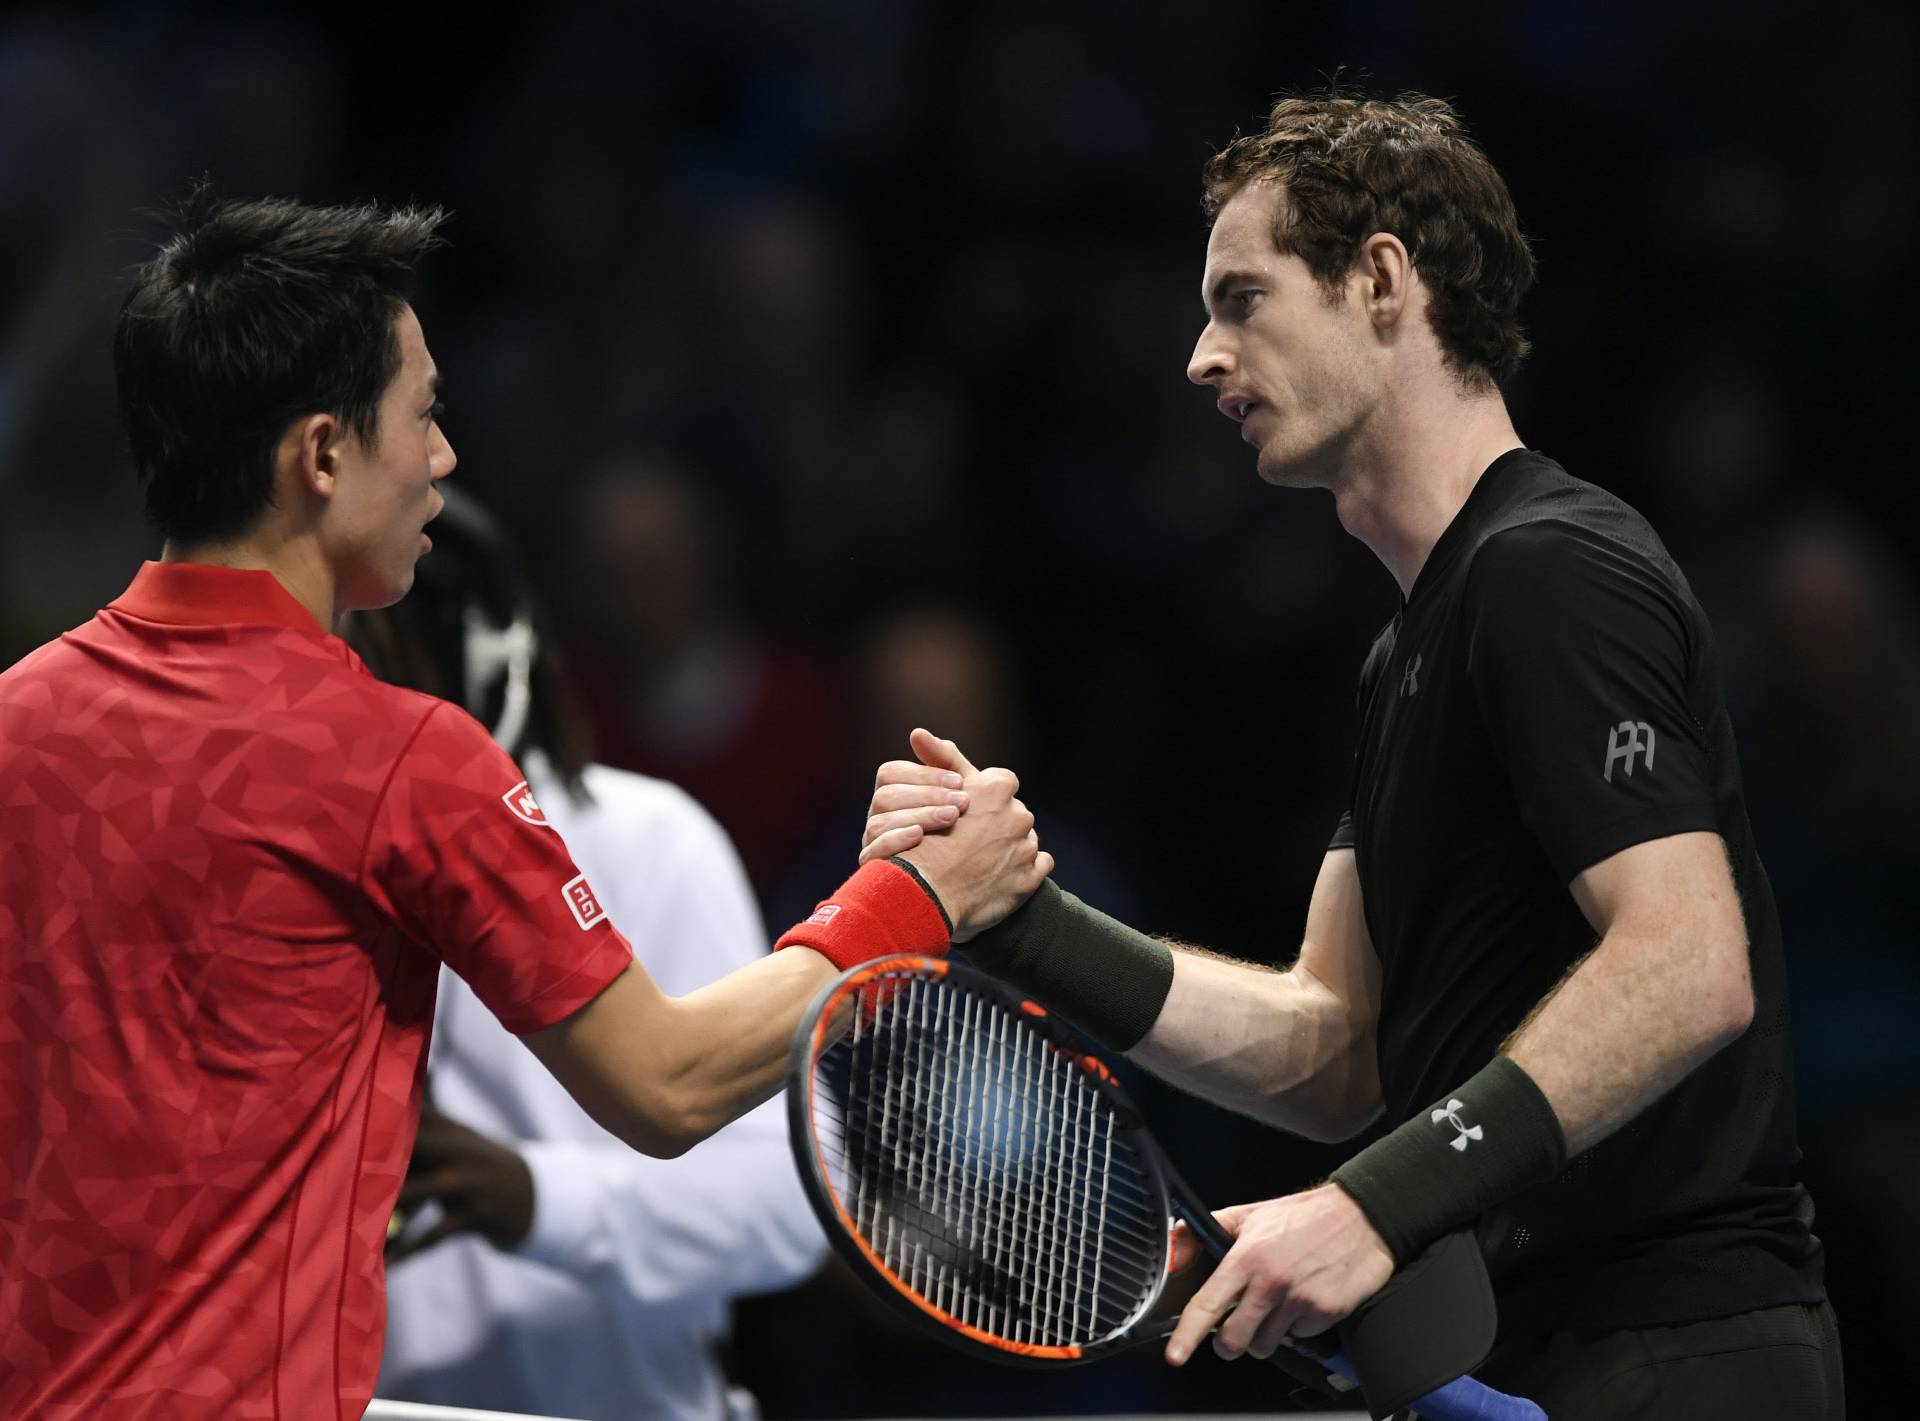 Great Britain's Andy Murray and Japan's Kei Nishikori shake hands after their round robin match